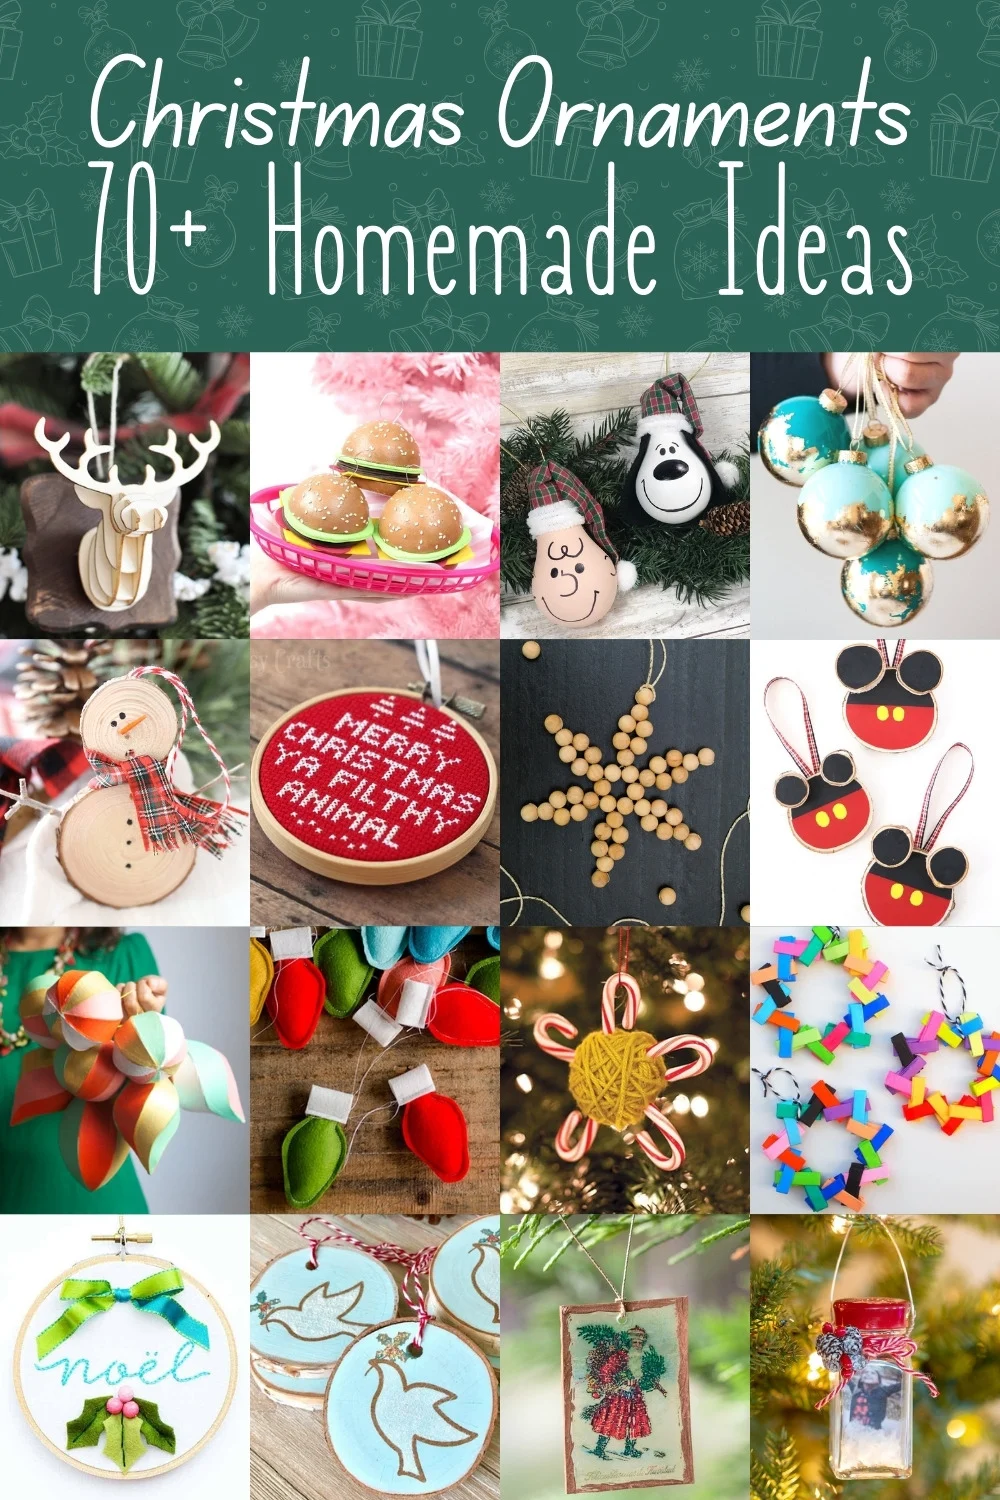 DIY Christmas Ornaments to Make that Are Fun & Festive! - DIY Candy